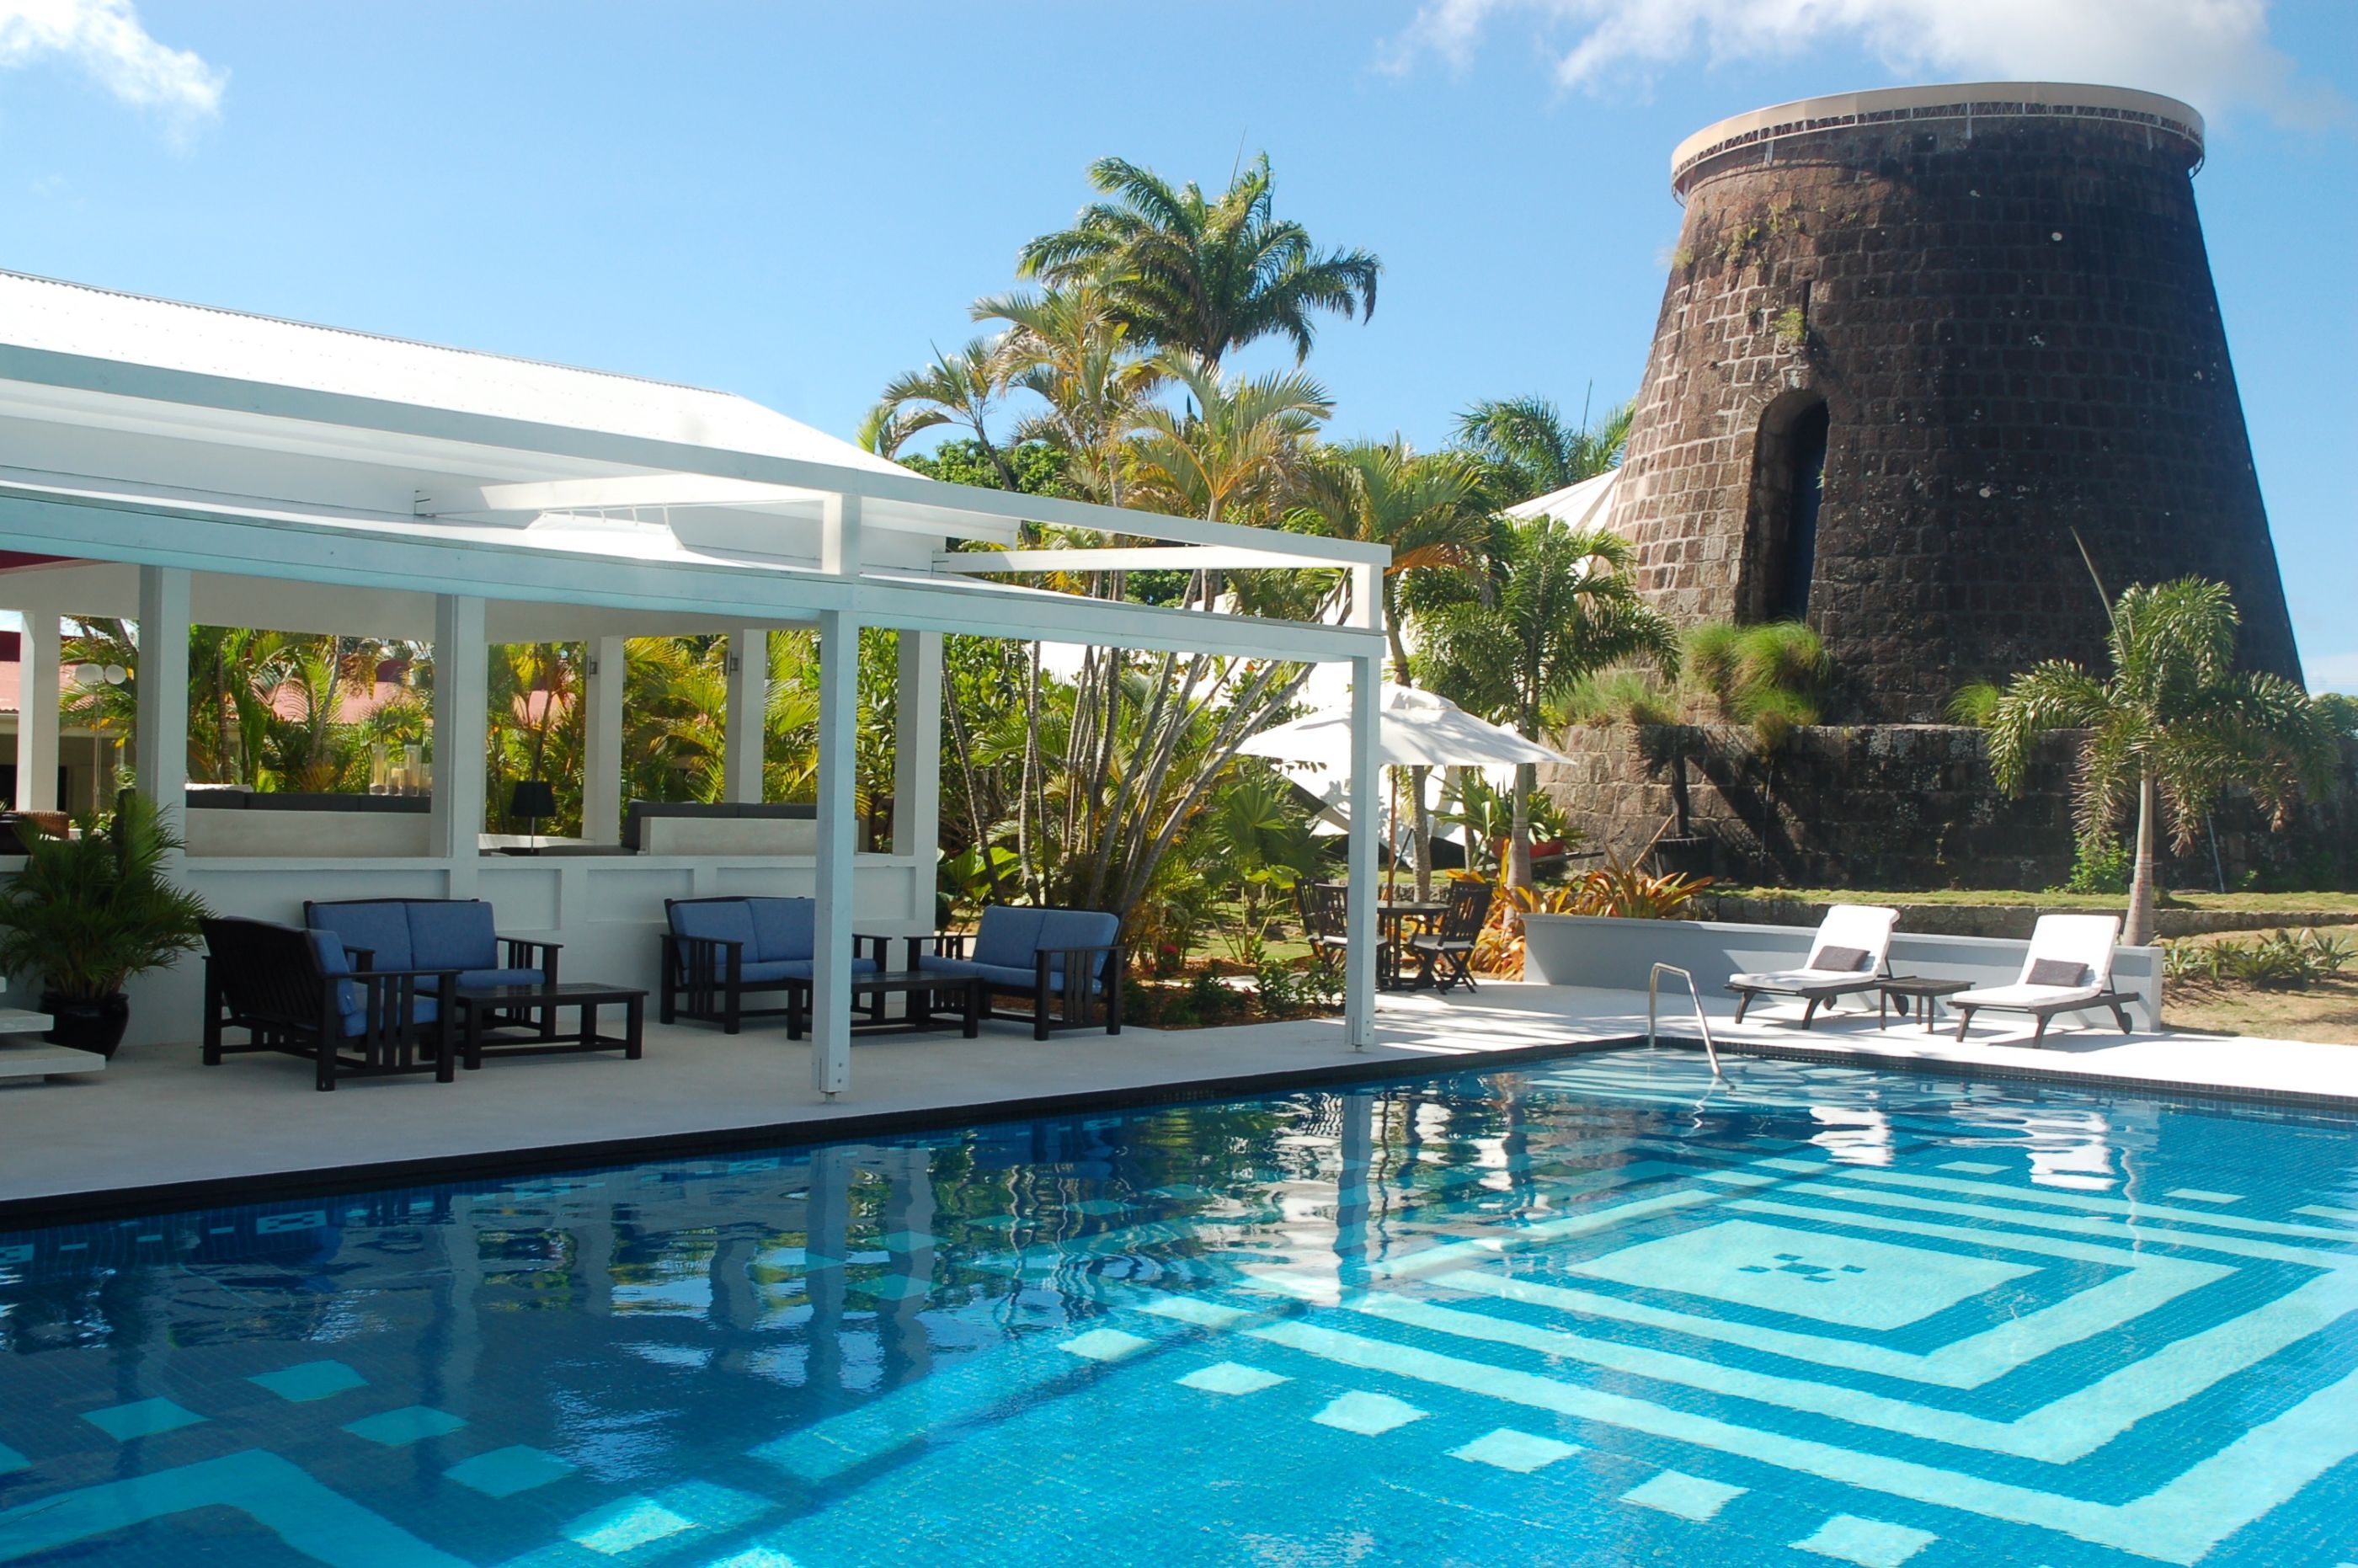 Swimming pool of Montpellier Plantation, Nevis